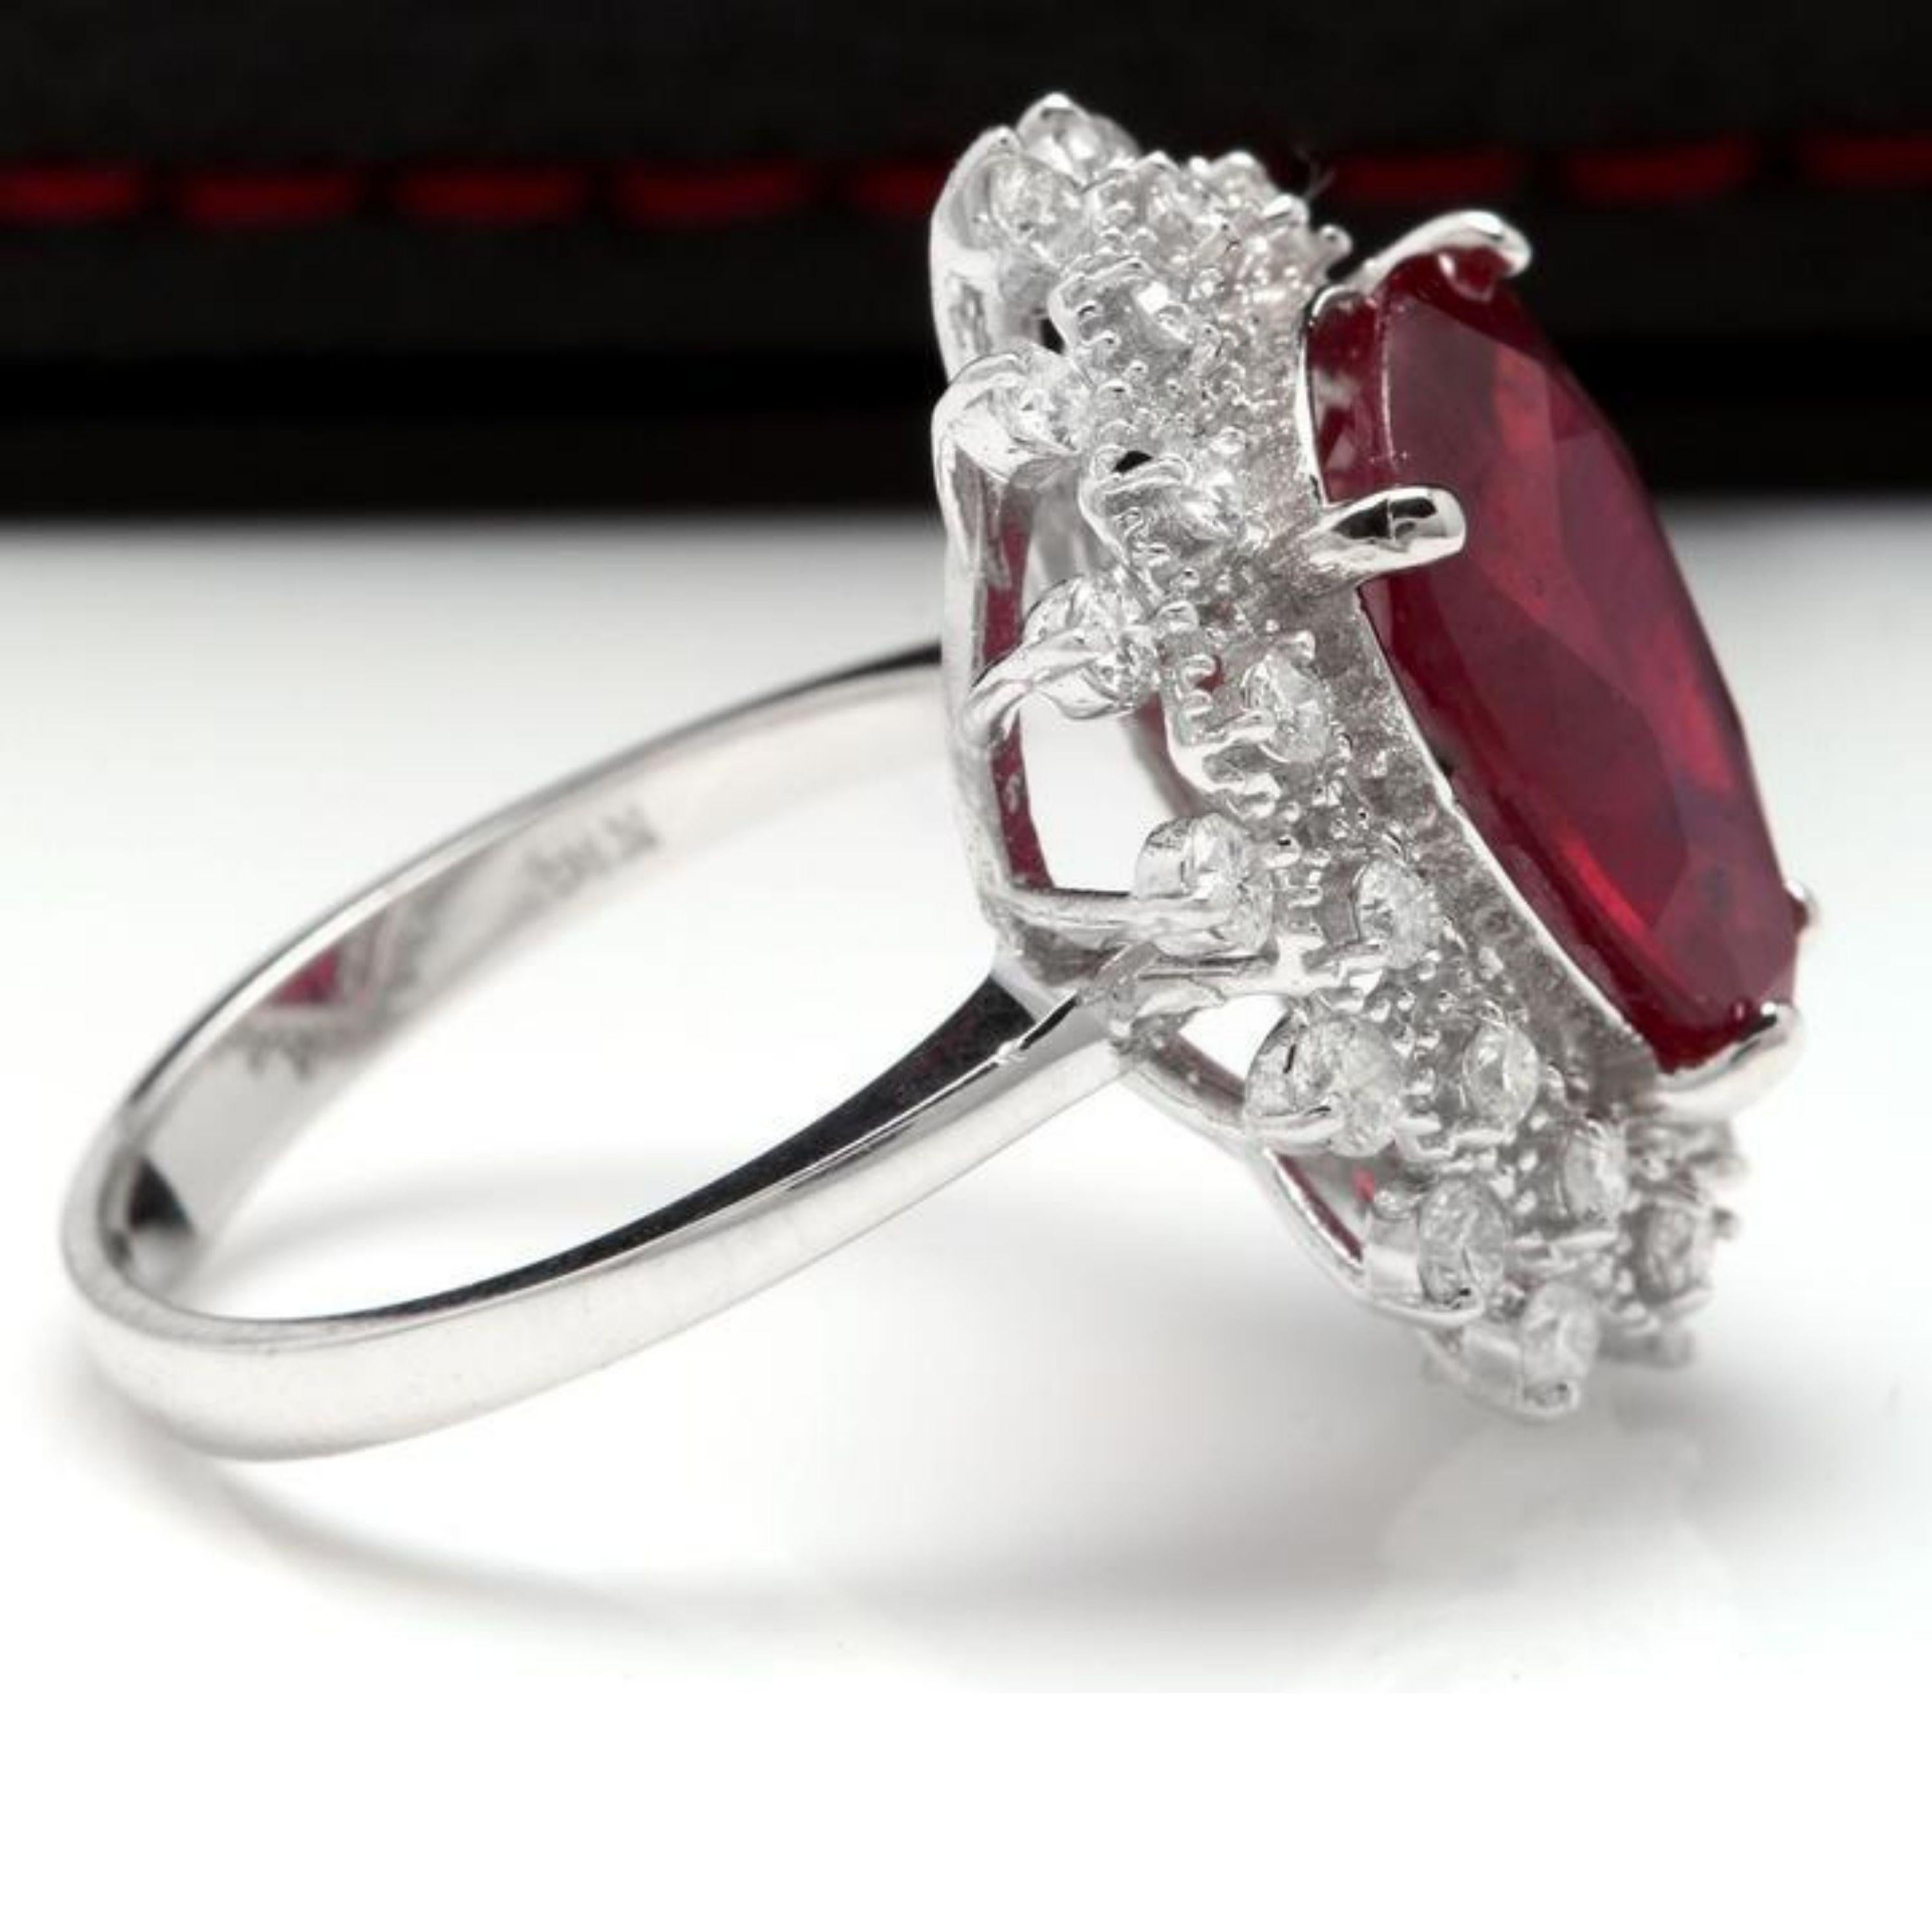 7.90 Carats Impressive Natural Red Ruby and Diamond 14K White Gold Ring

Total Natural Red Ruby Weight is: Approx. 7.00 Carats (lead glass filled)

Ruby Measures: Approx. 14.20 x 10.70mm

Natural Round Diamonds Weight: Approx. 0.90 Carats (color G-H